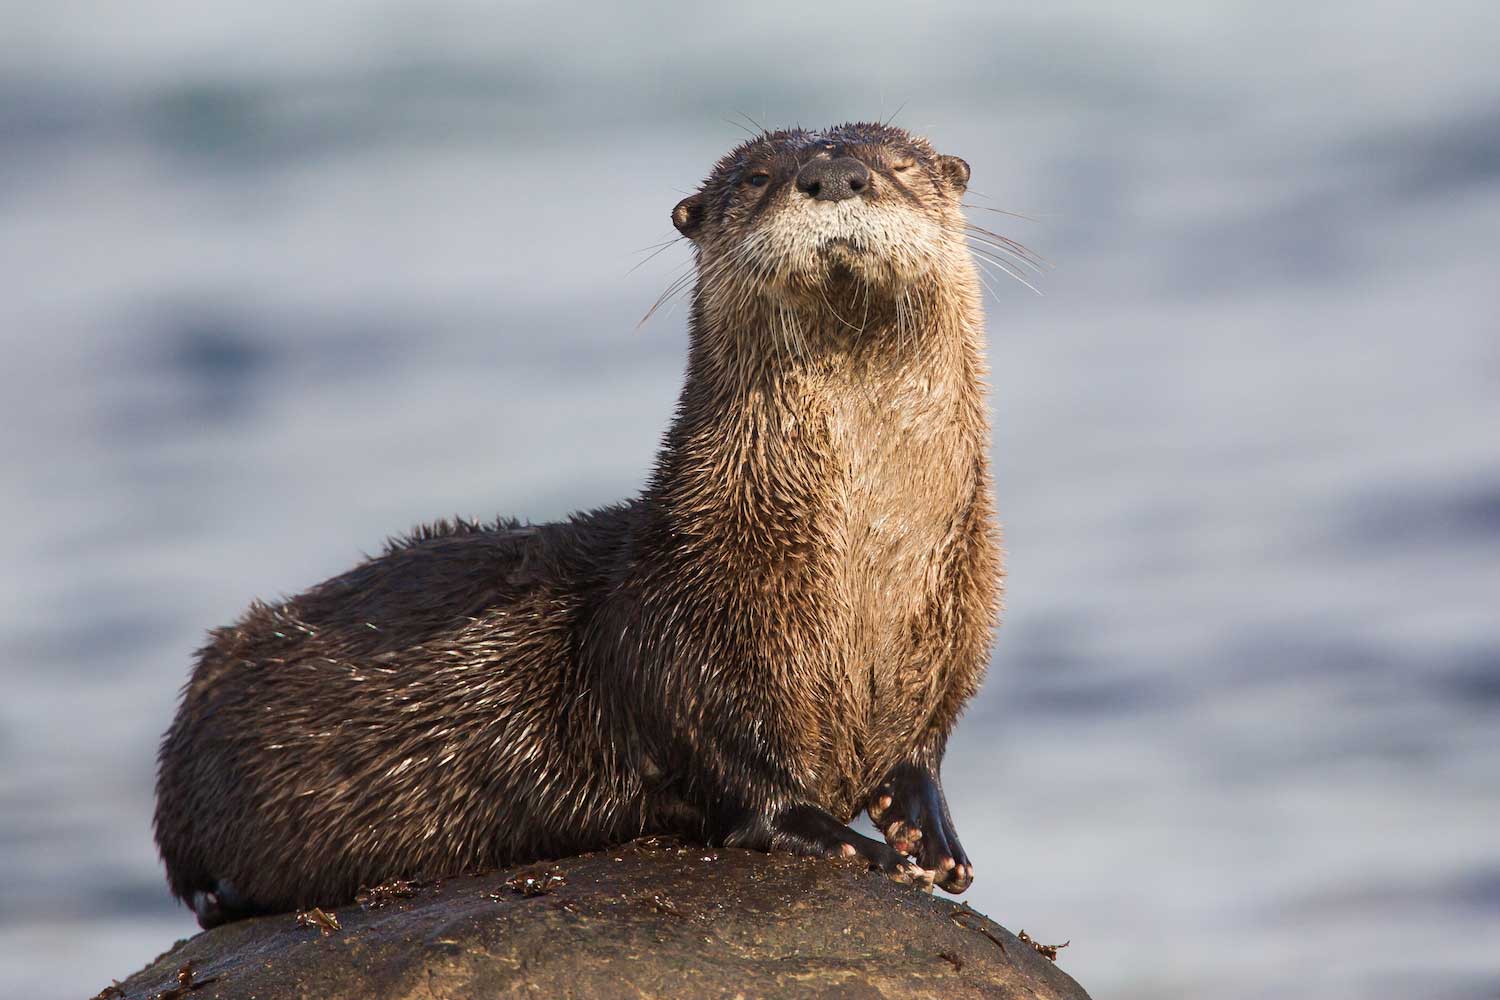 A river otter sitting on a large rock with its head tilted upward.